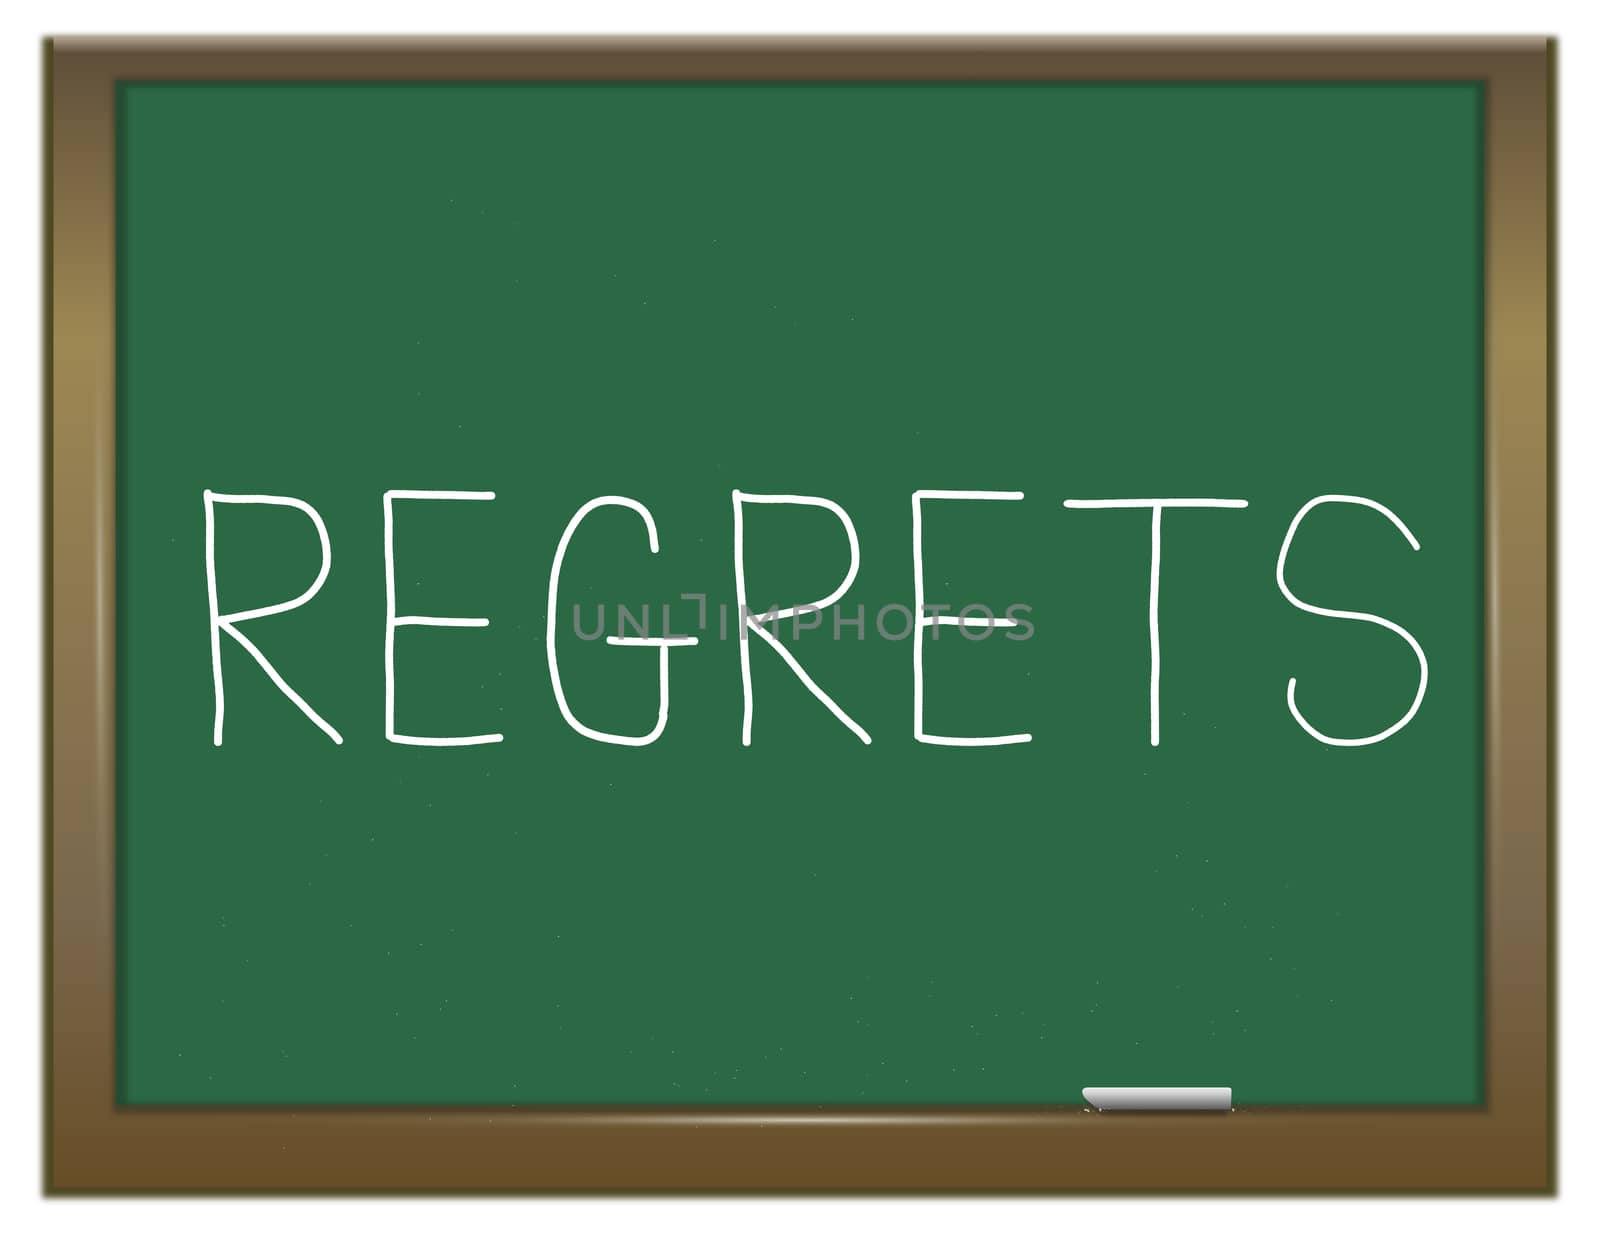 Illustration depicting a green chalkboard with a regrets concept.